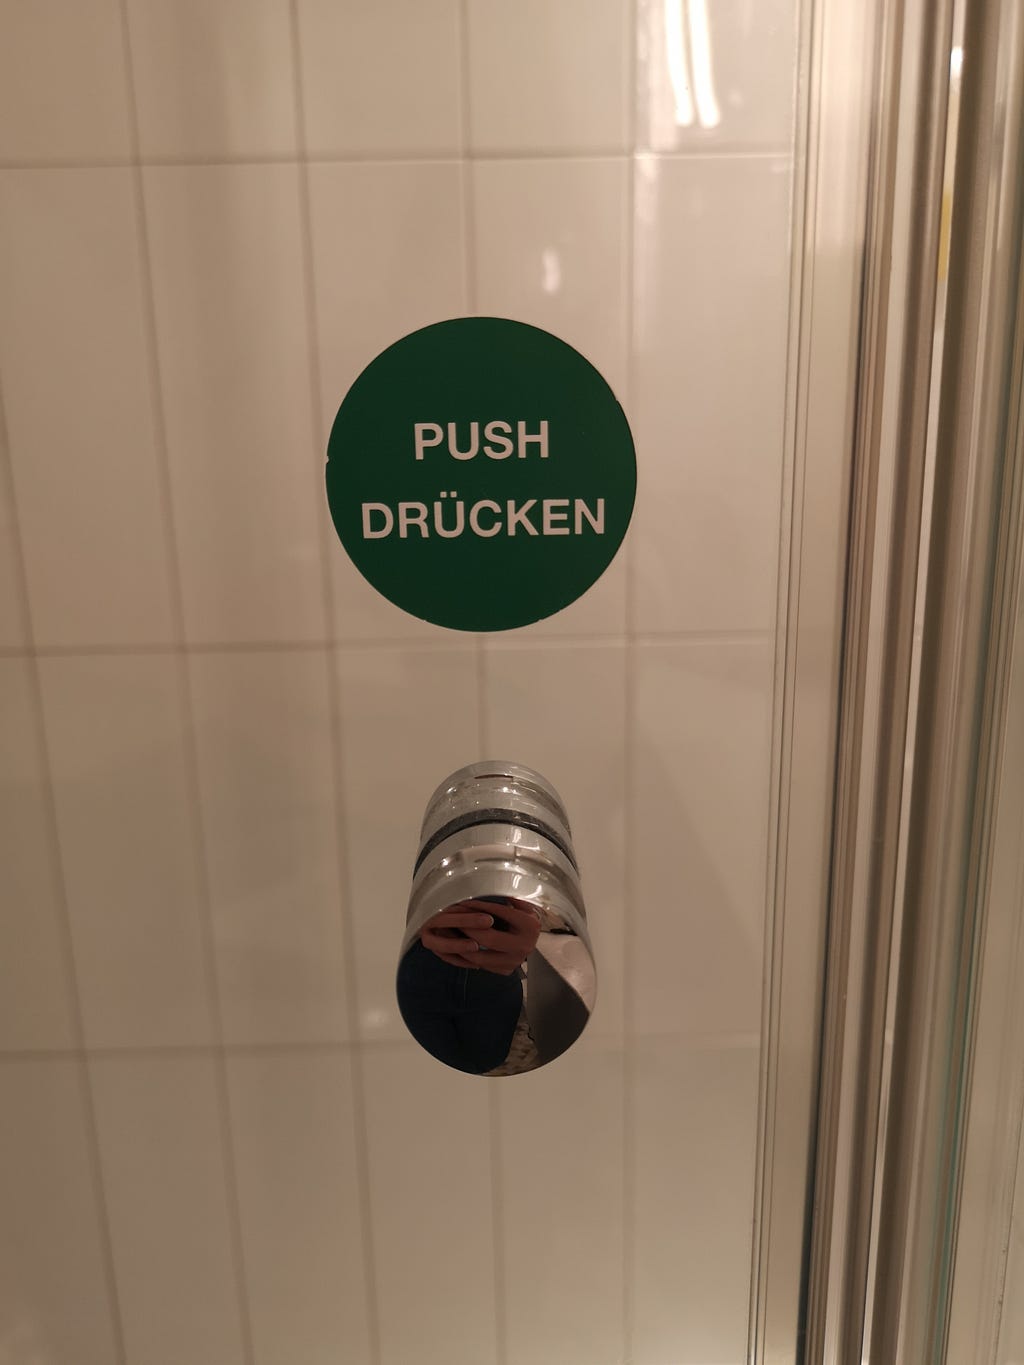 One side of the shower door in the bathroom of the hotel with a push signifier written in a round sticker.